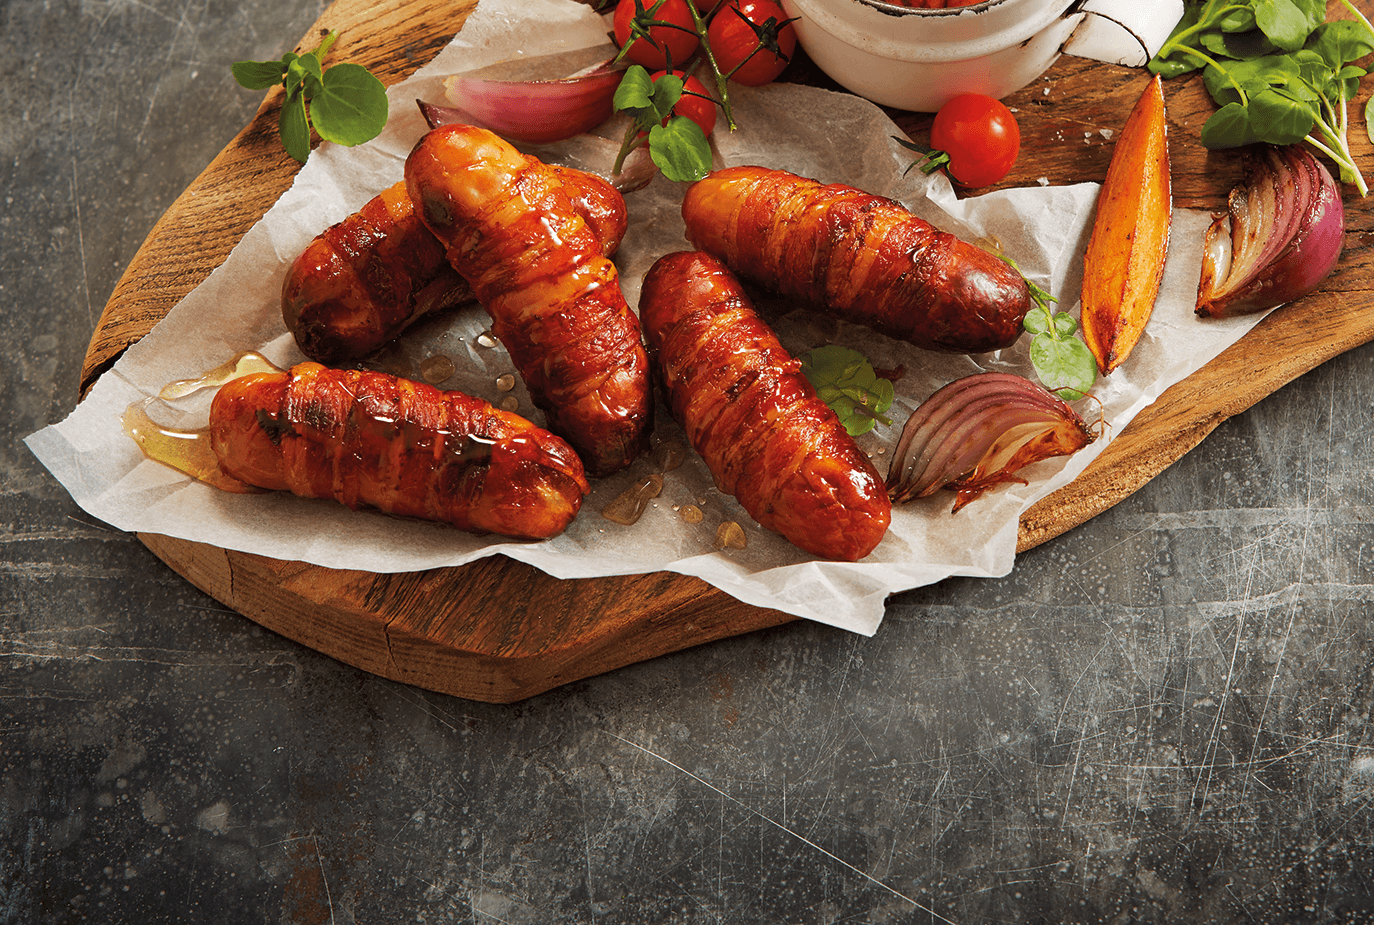 Finnebrogue make pigs in blankets without nitrites. Each one is hand-rolled.